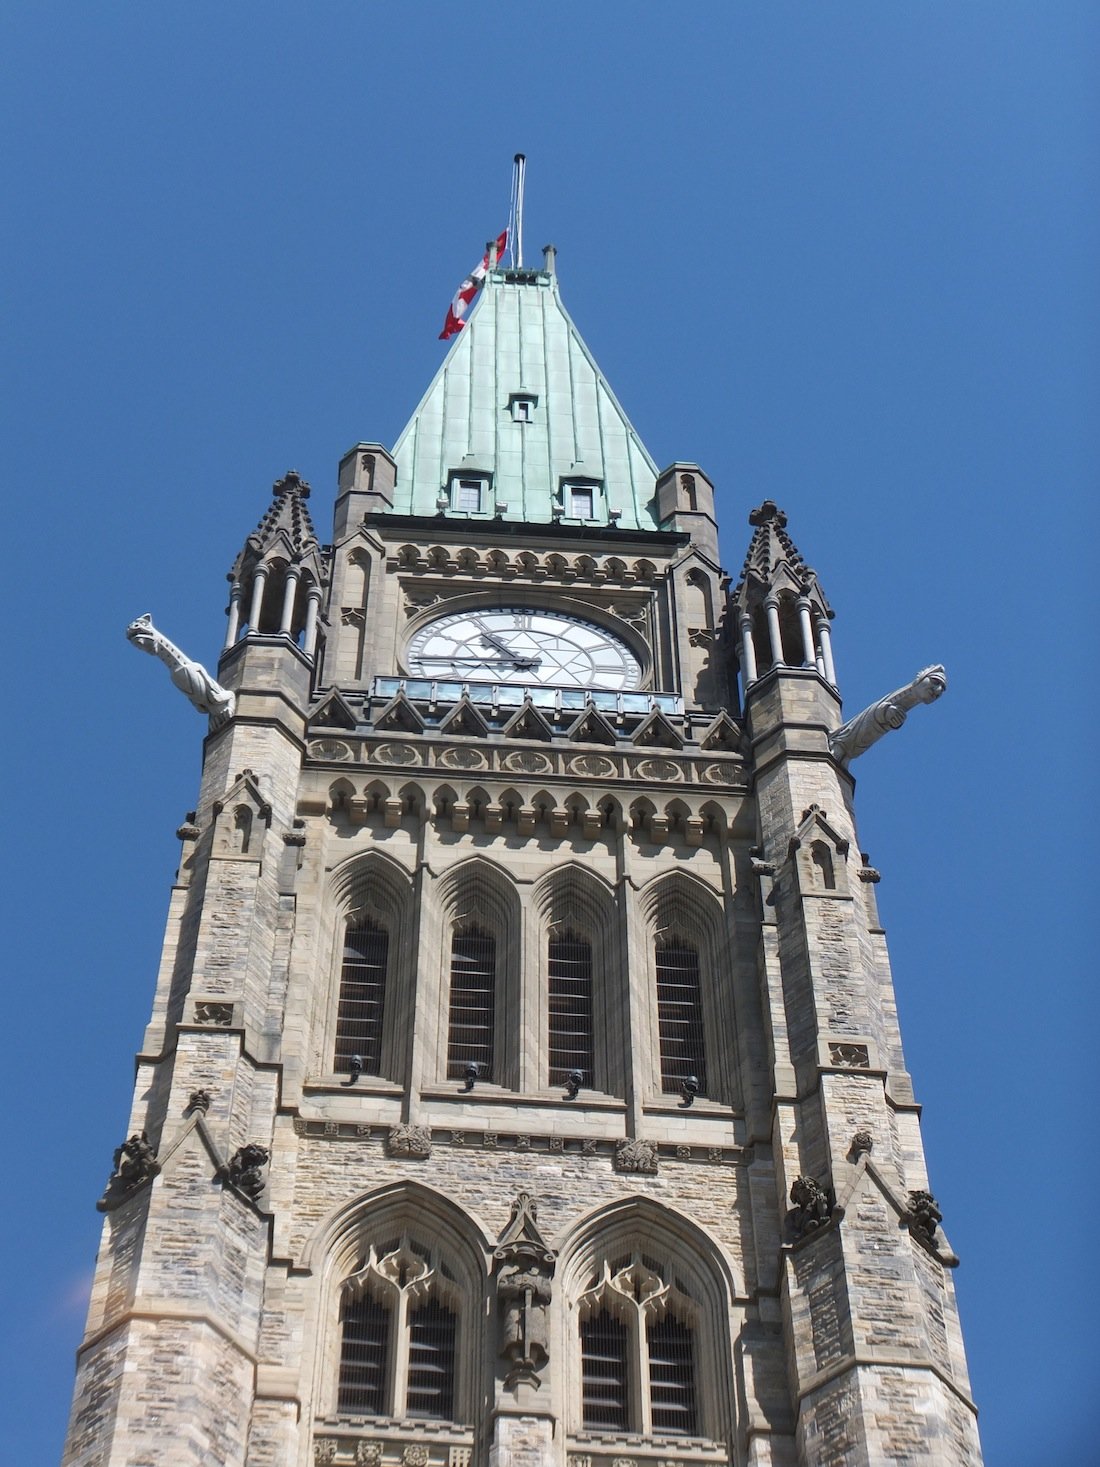 The Peace Tower, in Ottawa